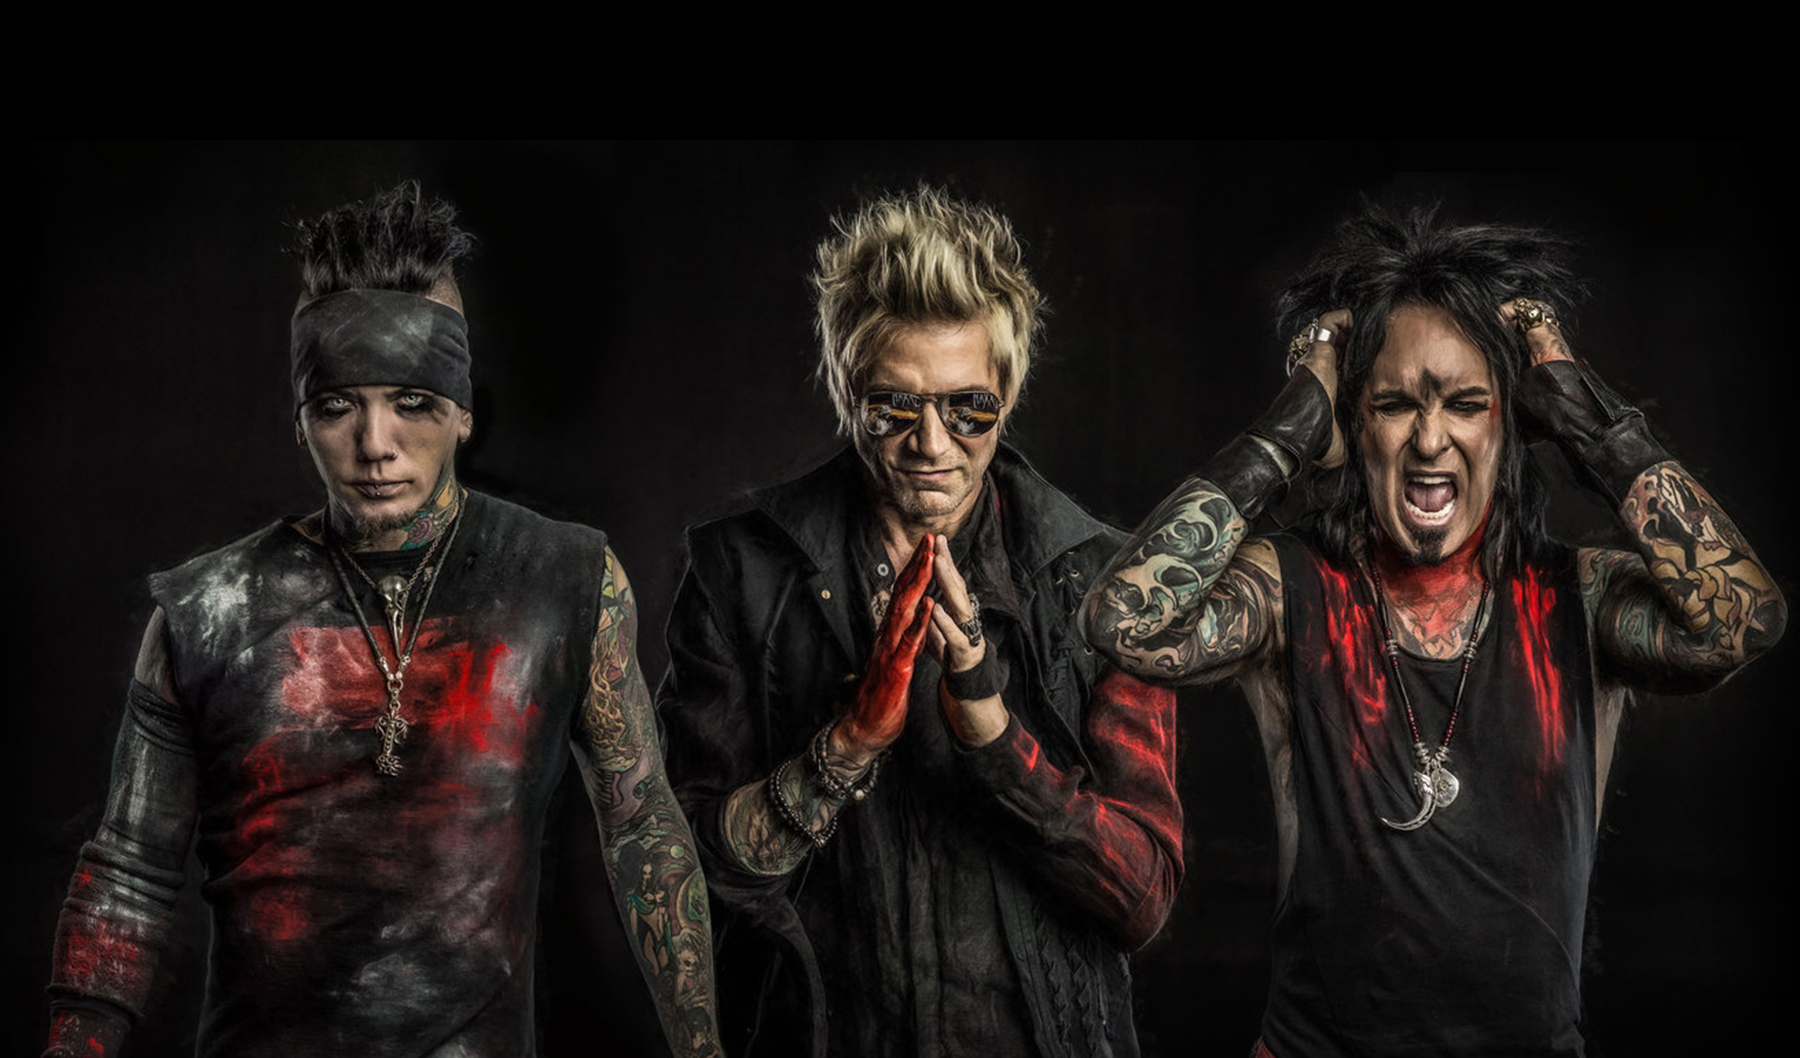 Sixx A.M. Want You To “Pray For Me“ Ahead of Upcoming 'HITS' Album - V13.net